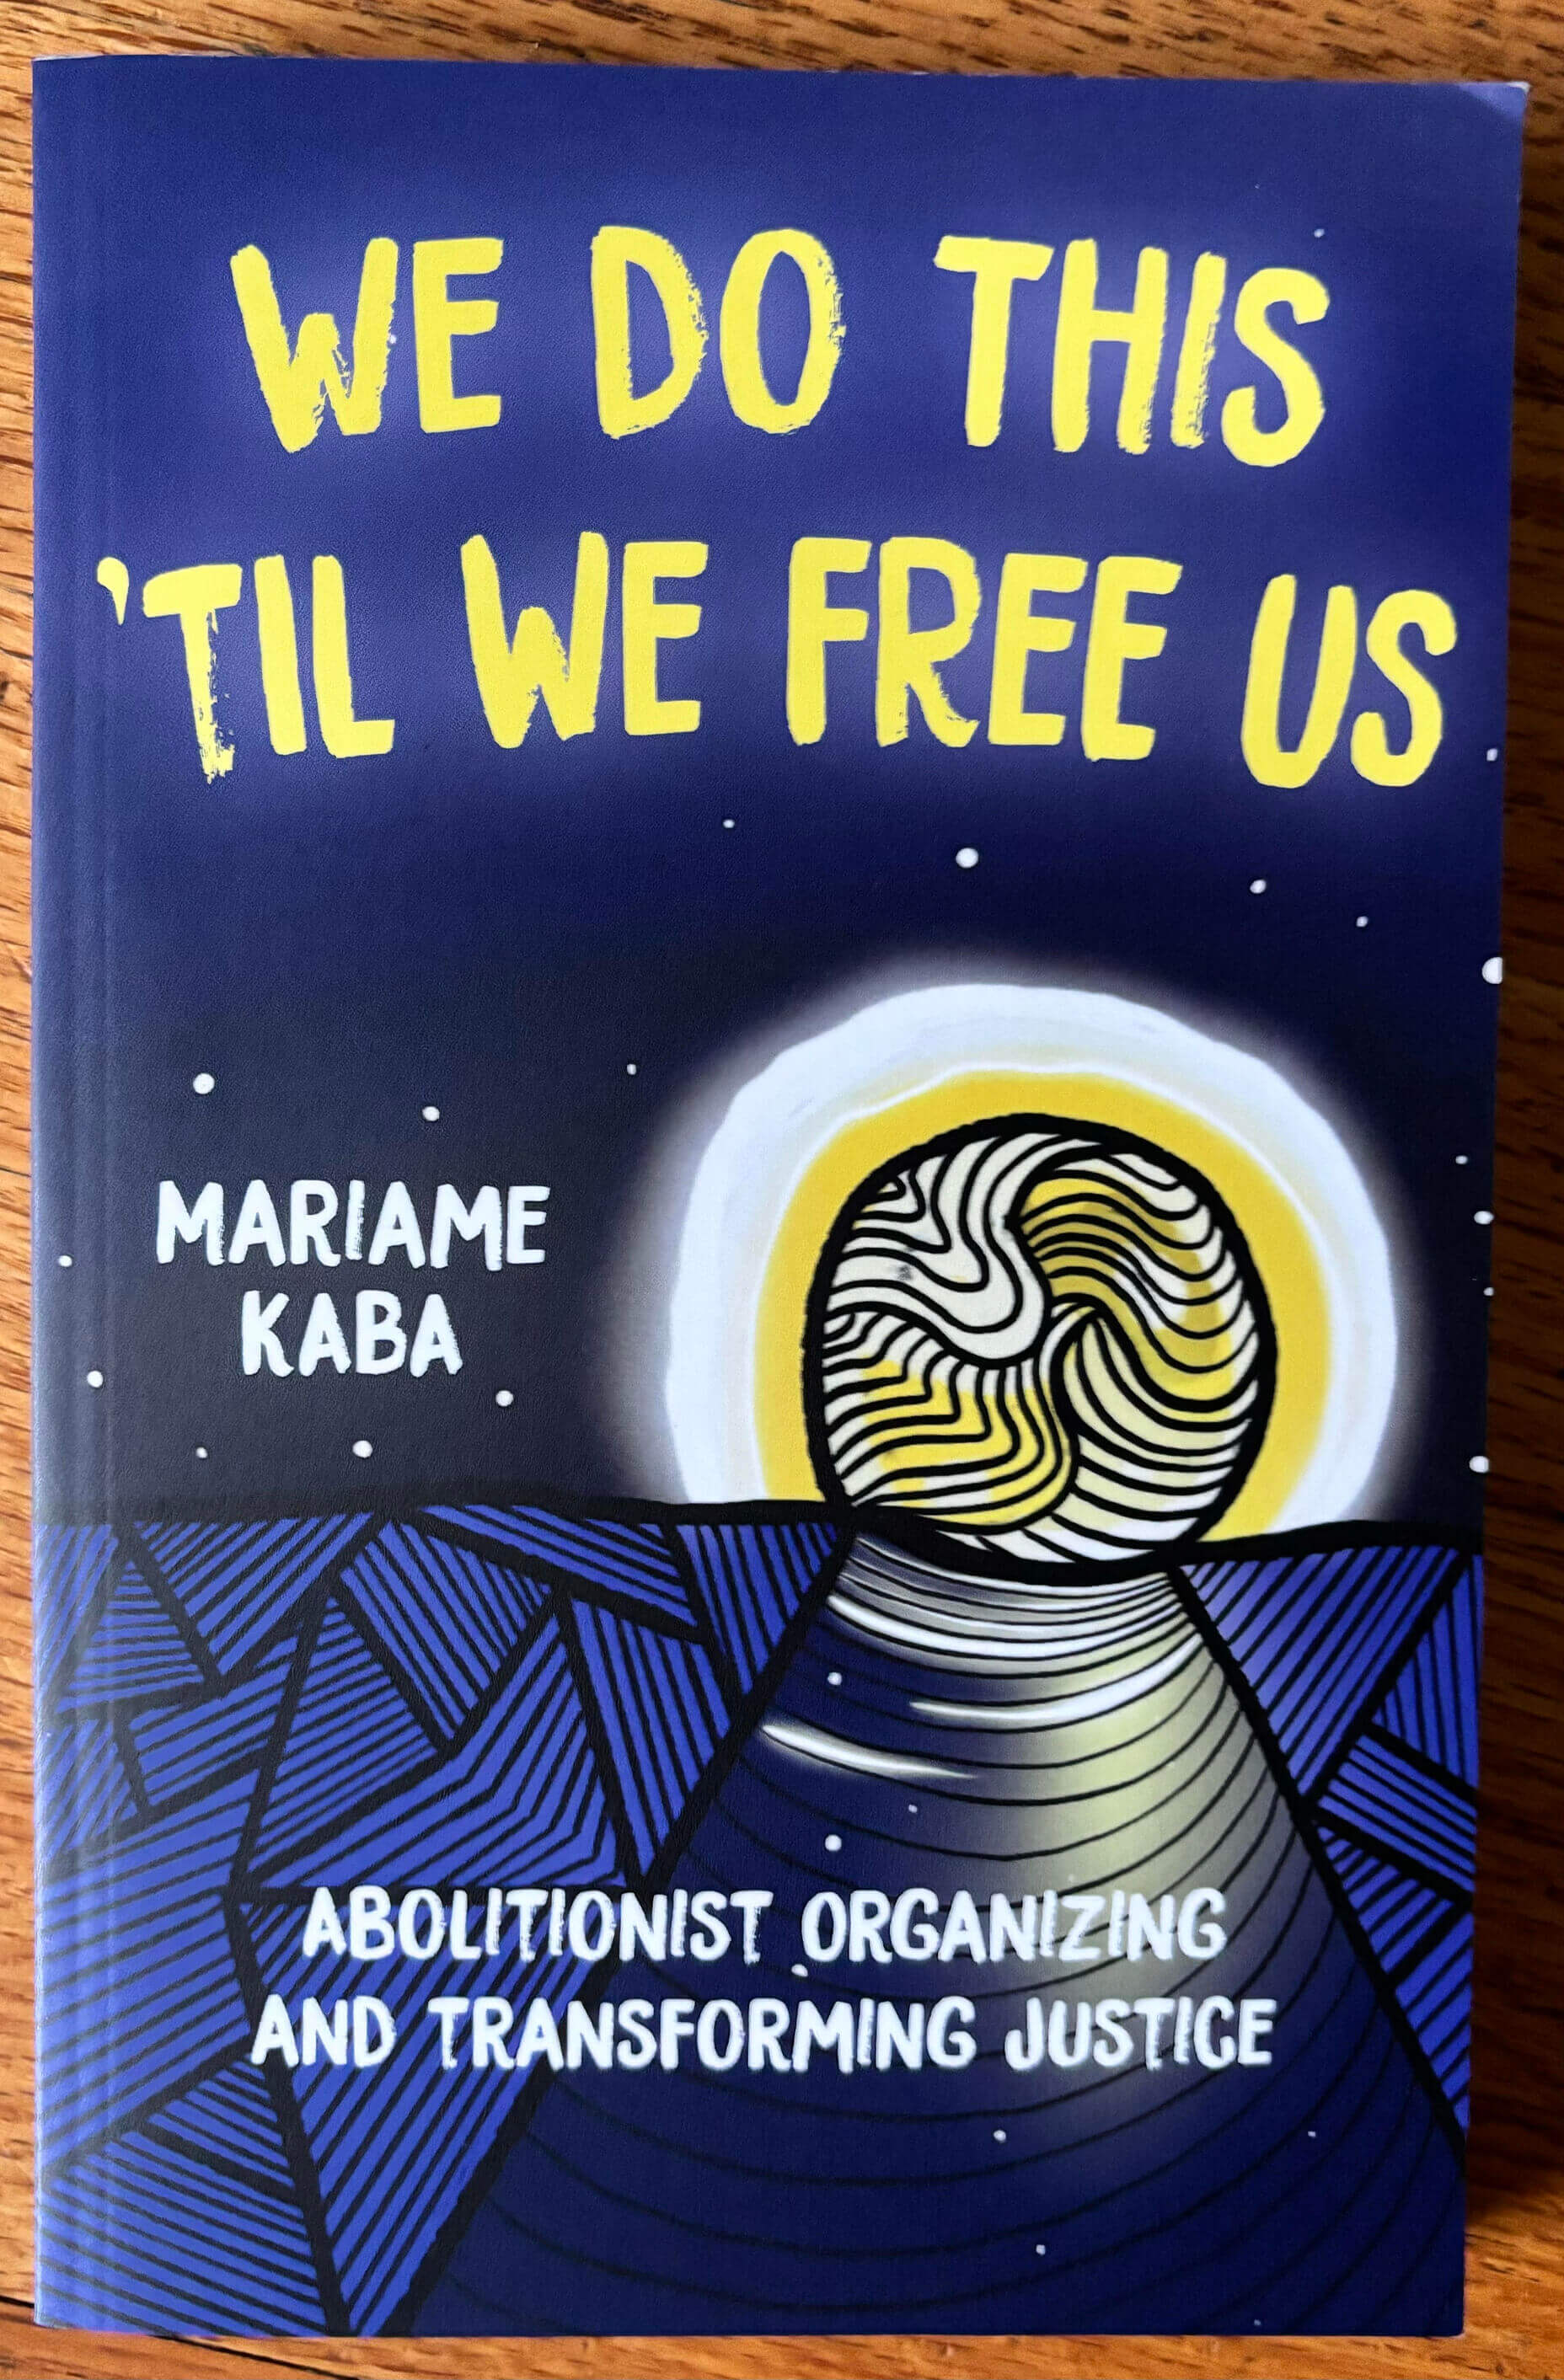 “We Do This ‘Til We Free Us” by Mariame Kaba